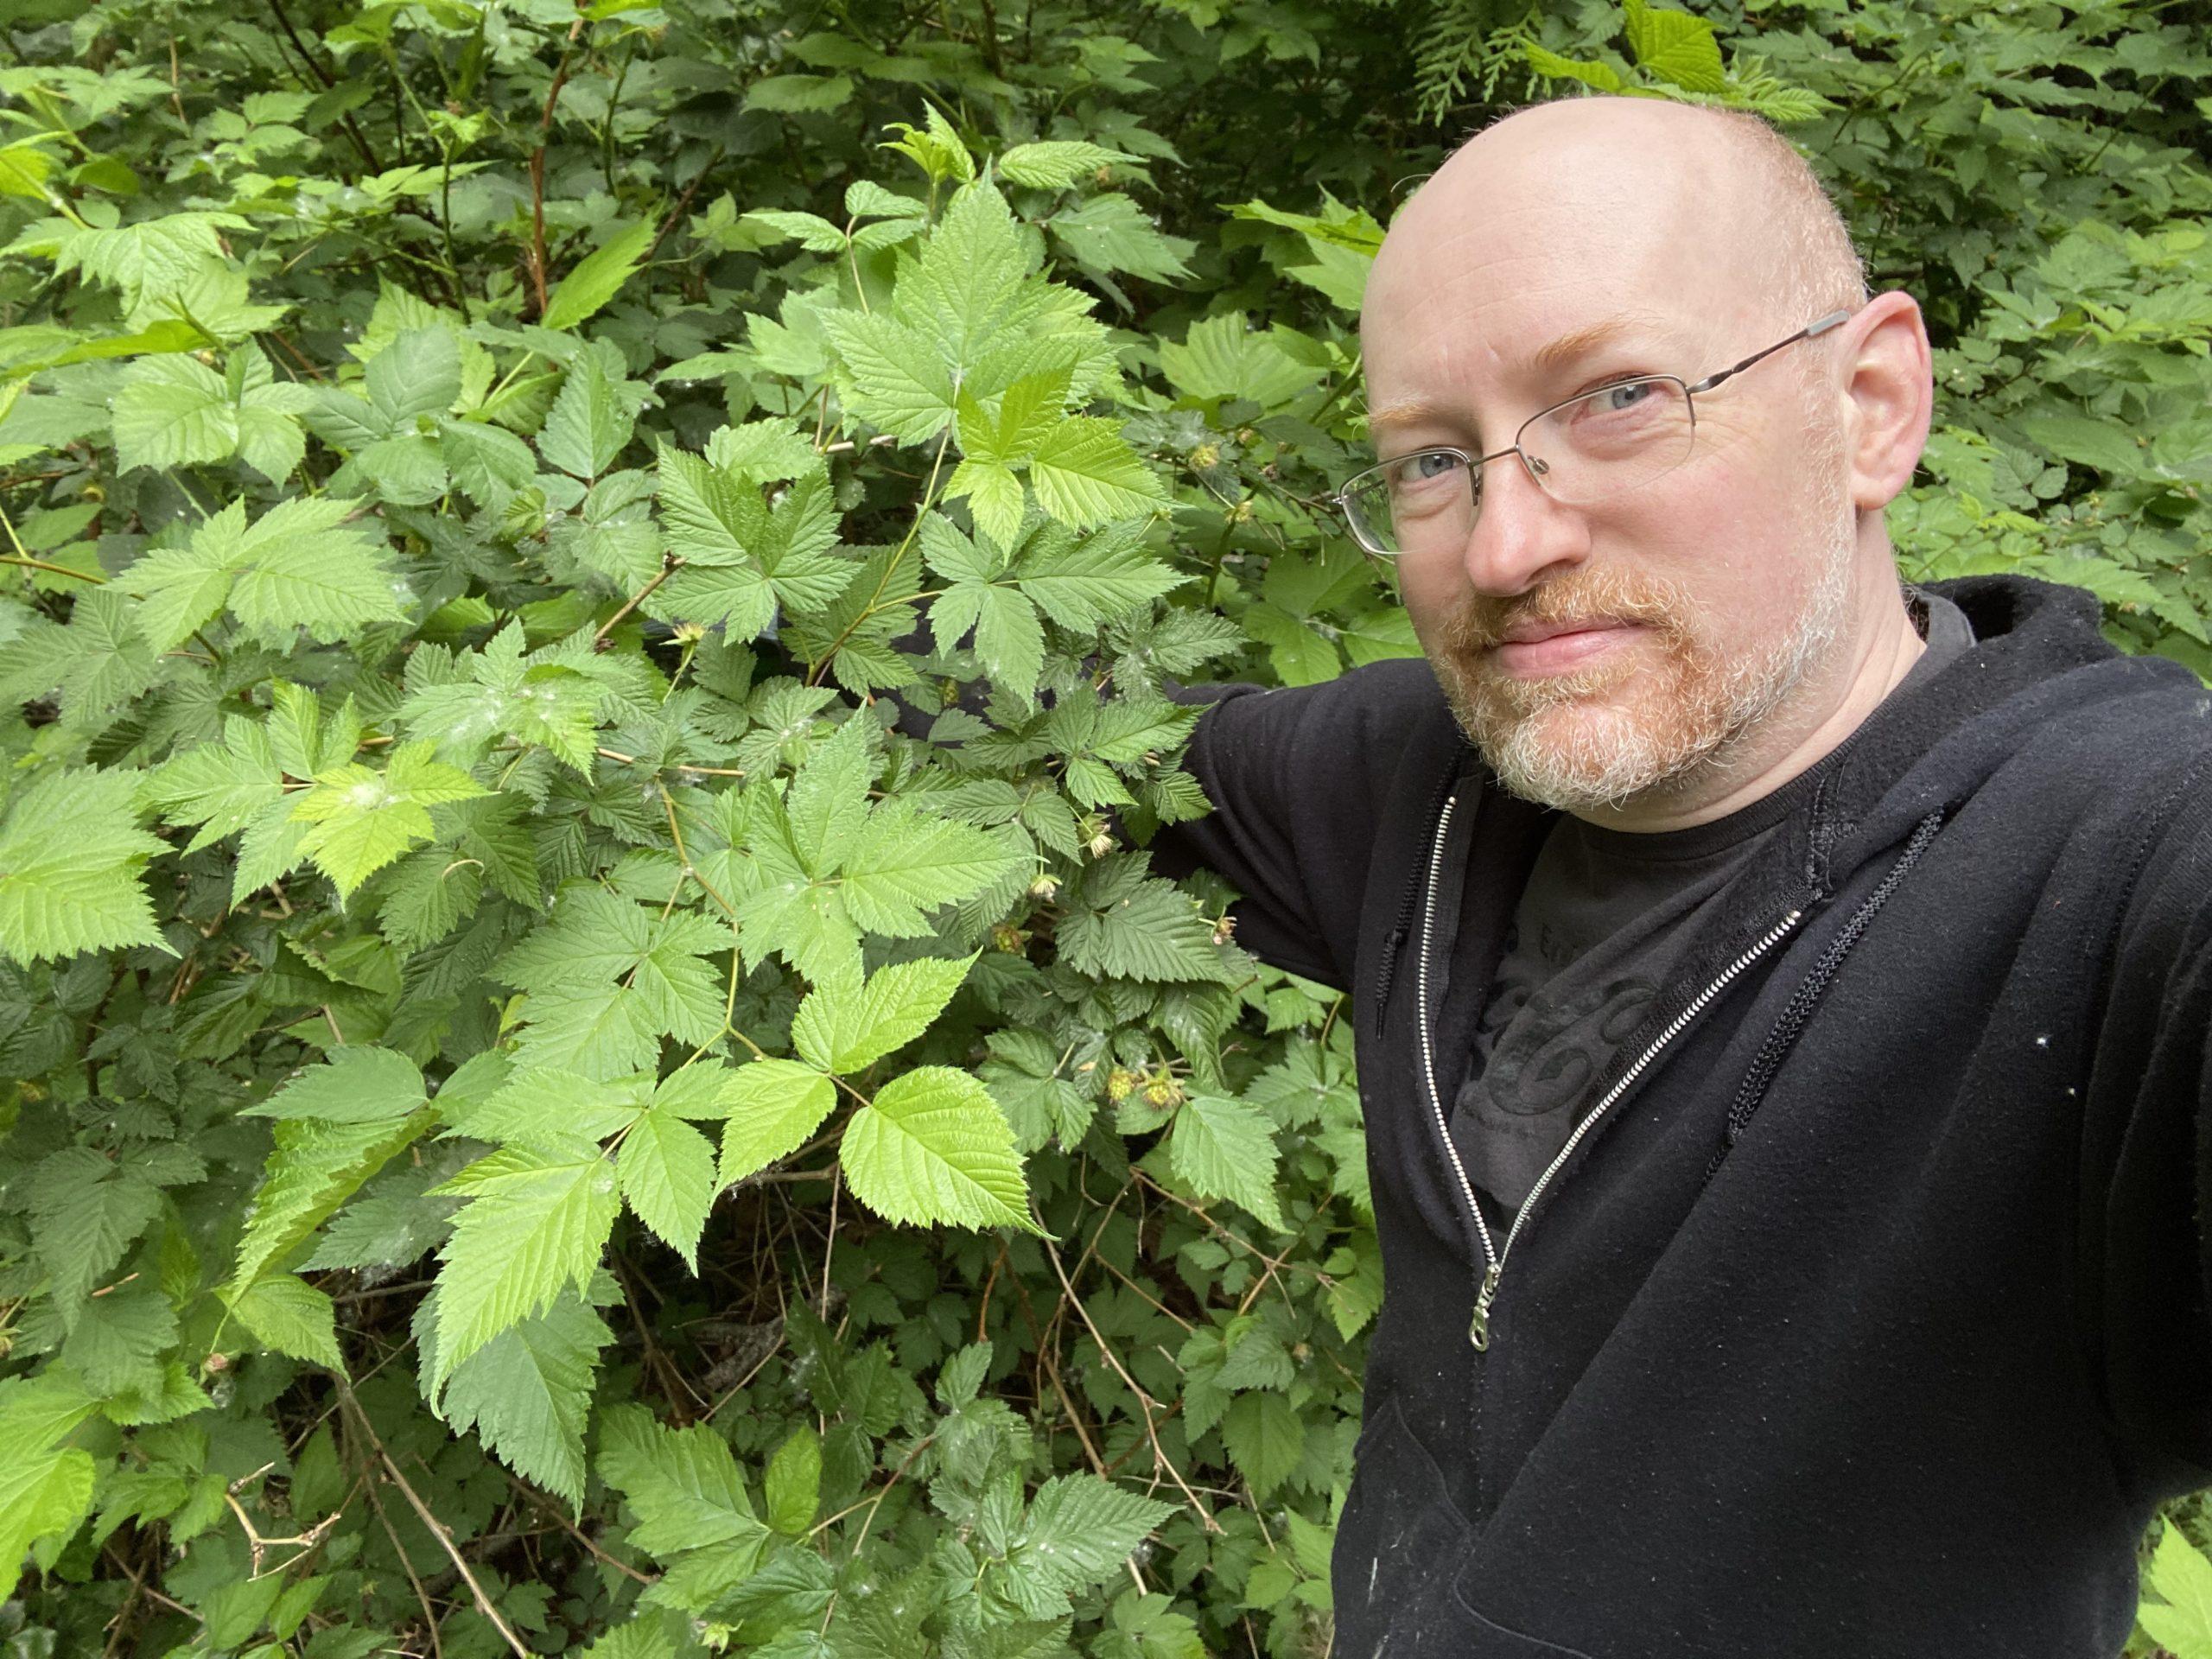 Me with a determined expression and one arm disappearing back into a bunch of green leaves.